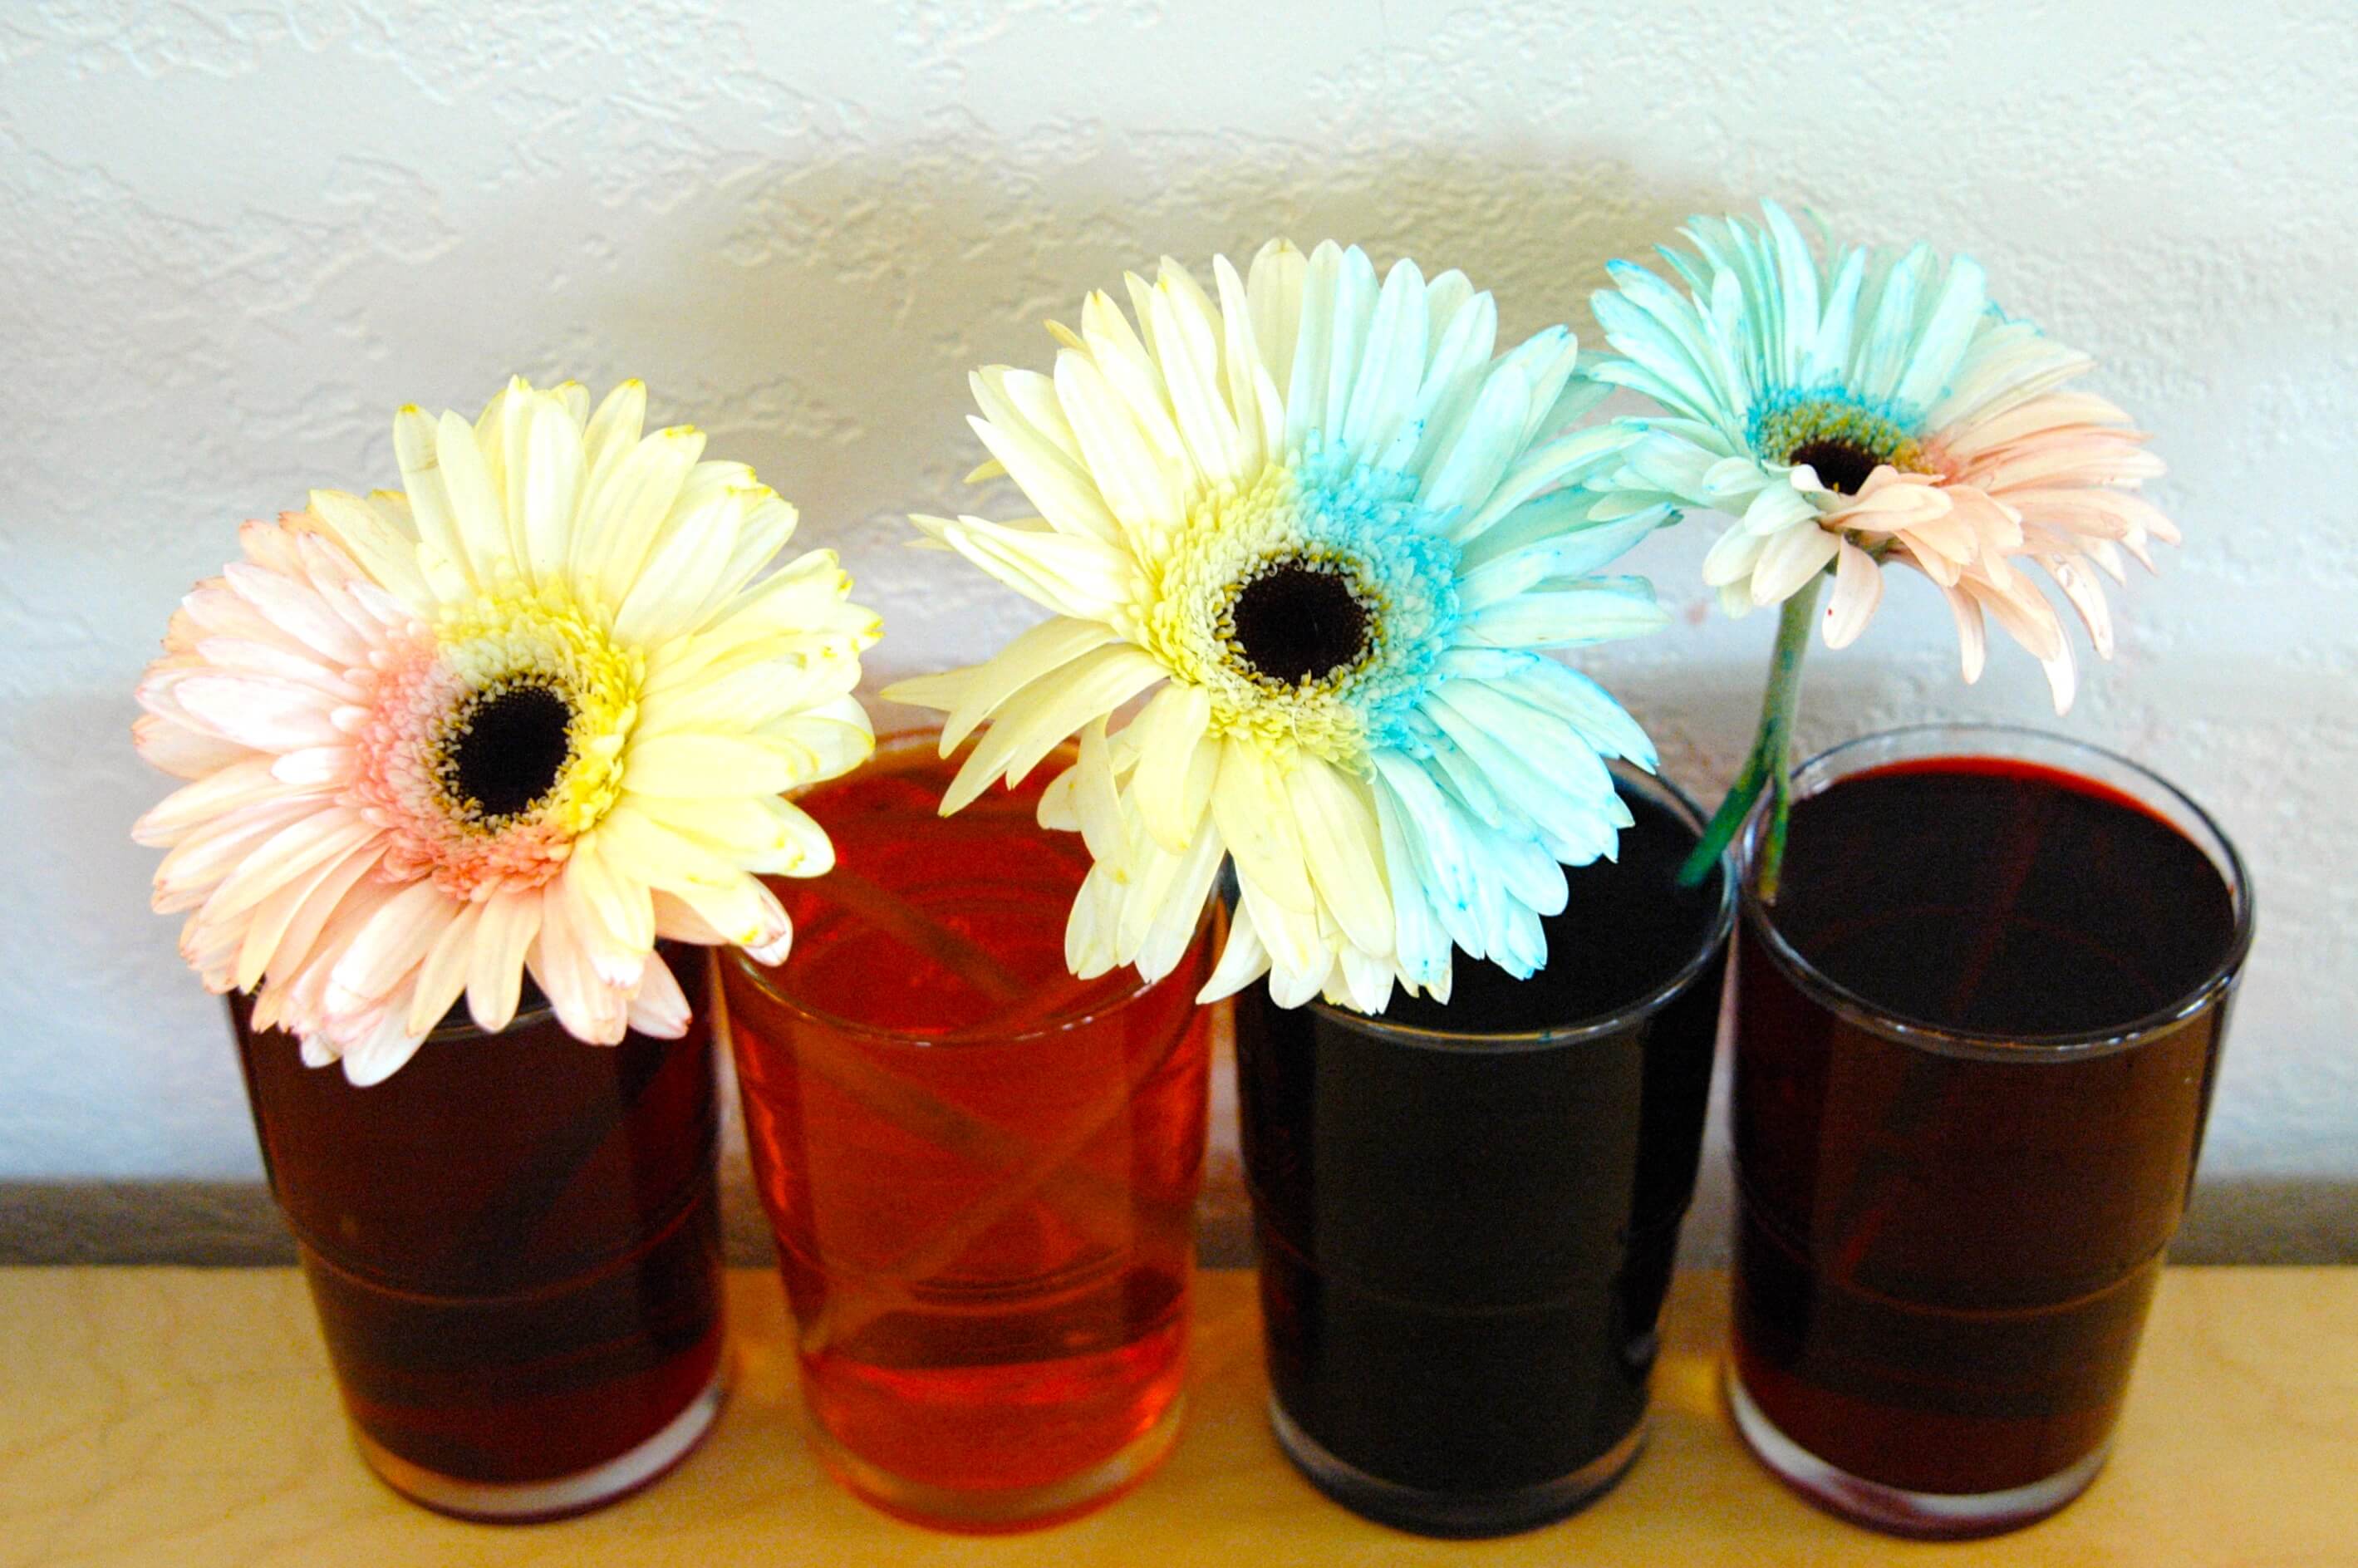 food color dyed flowers | Dyed flowers, Flowers, Food 